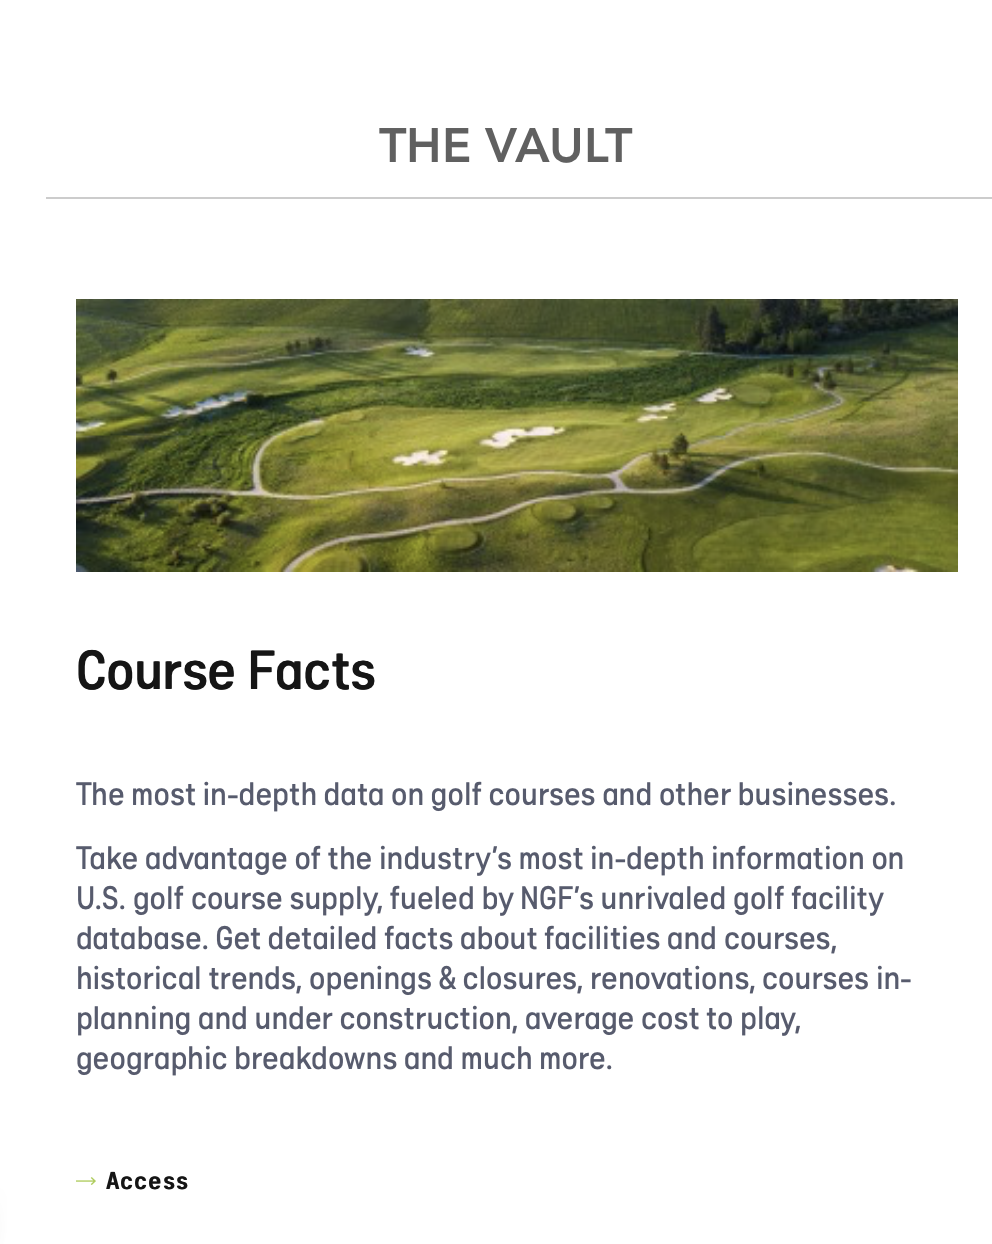 Course Facts Interactive Map